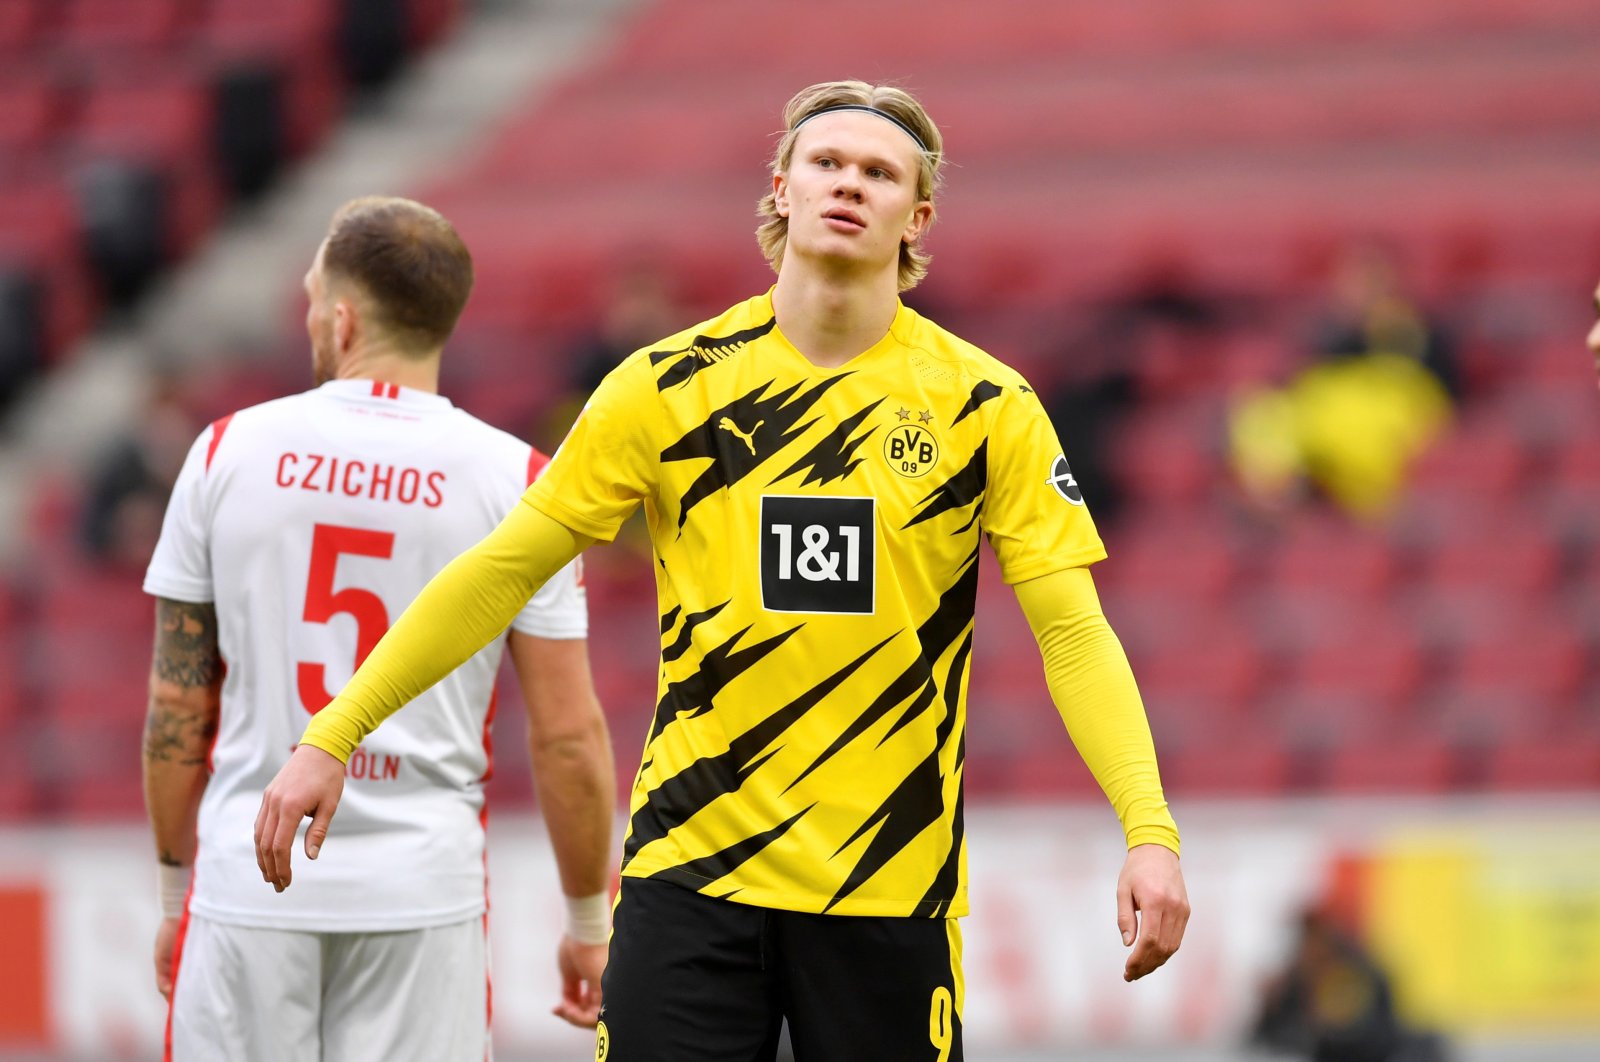 Borussia Dortmund's Erling Braut Haaland during a match against FC Cologne, in Cologne, Germany, March 20, 2021. (Reuters Photo)